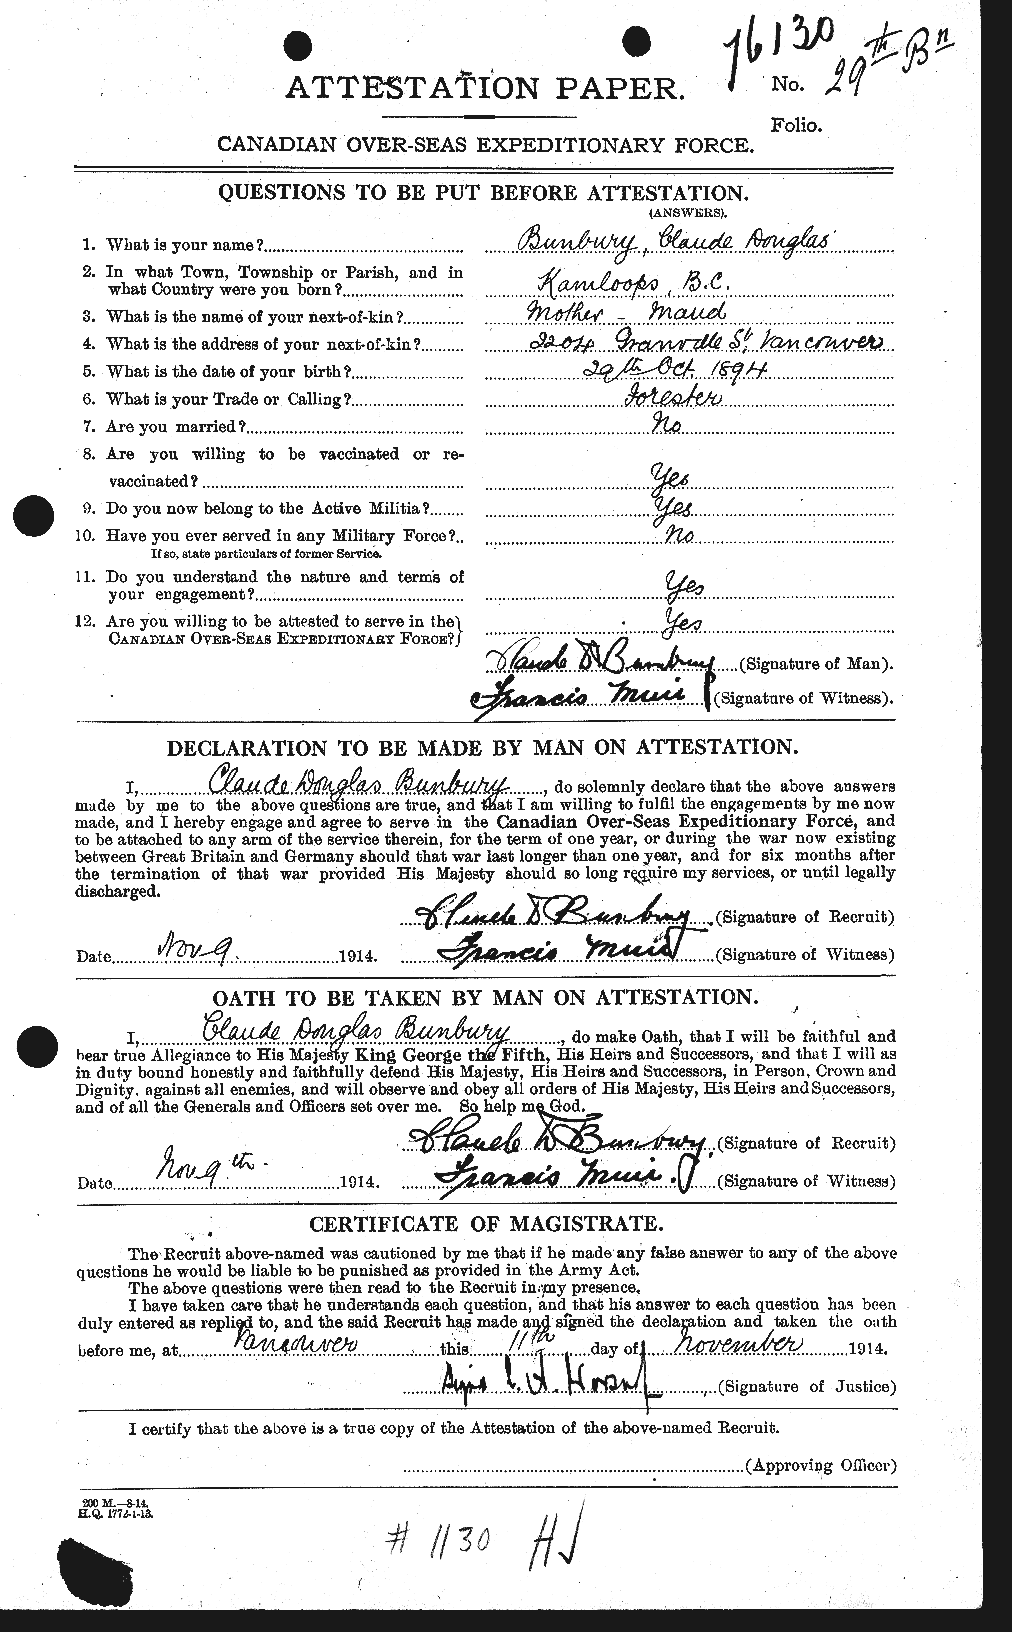 Personnel Records of the First World War - CEF 269885a